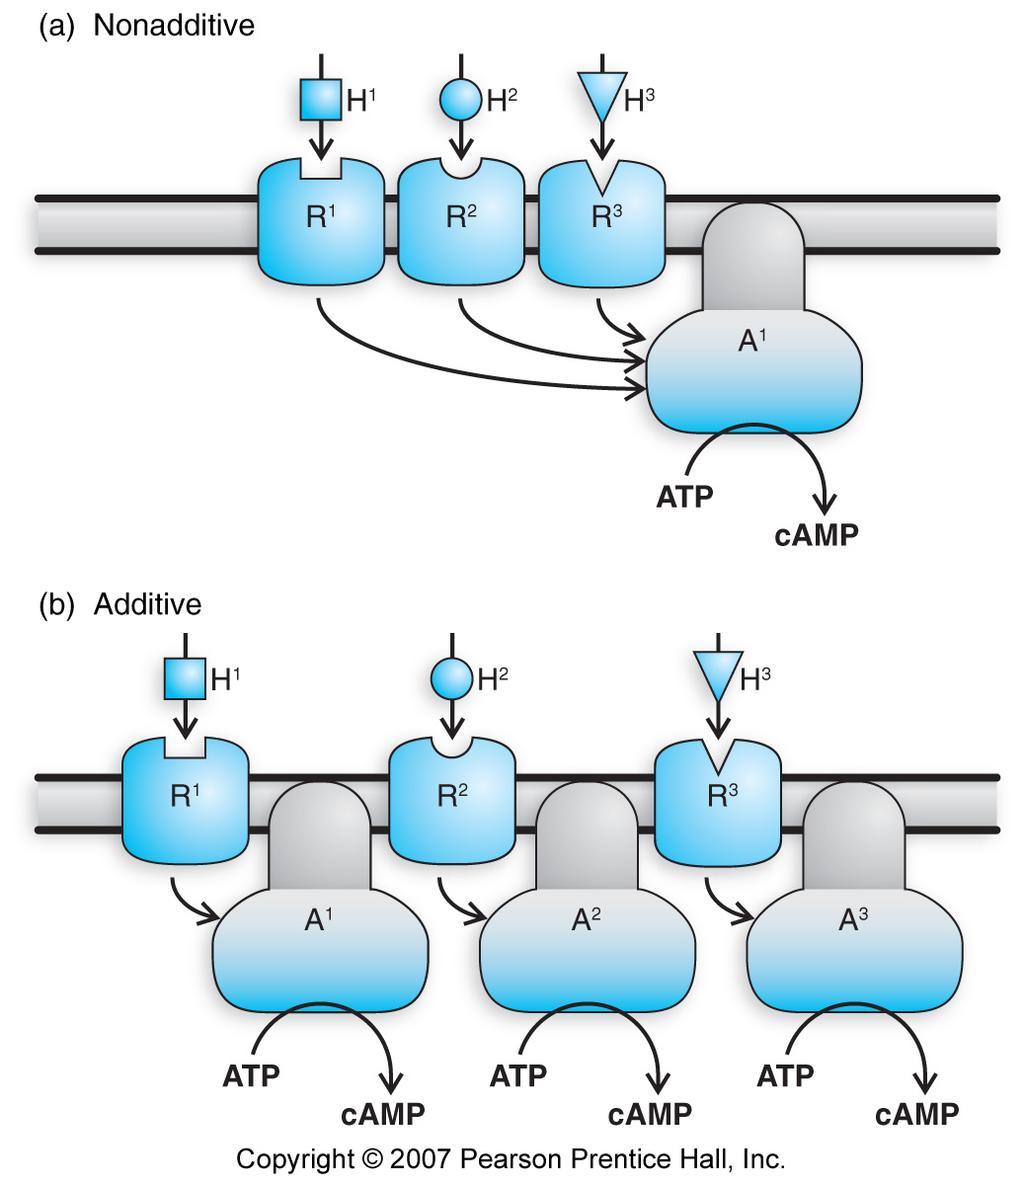 Membrane eceptors surface - receptors: kinases, phosphatases and GC activities, ligandgated ion channels, transport next lecture Transducer, comparator, amplifier, crosstalk Gs AC ---> camp ----> PKA